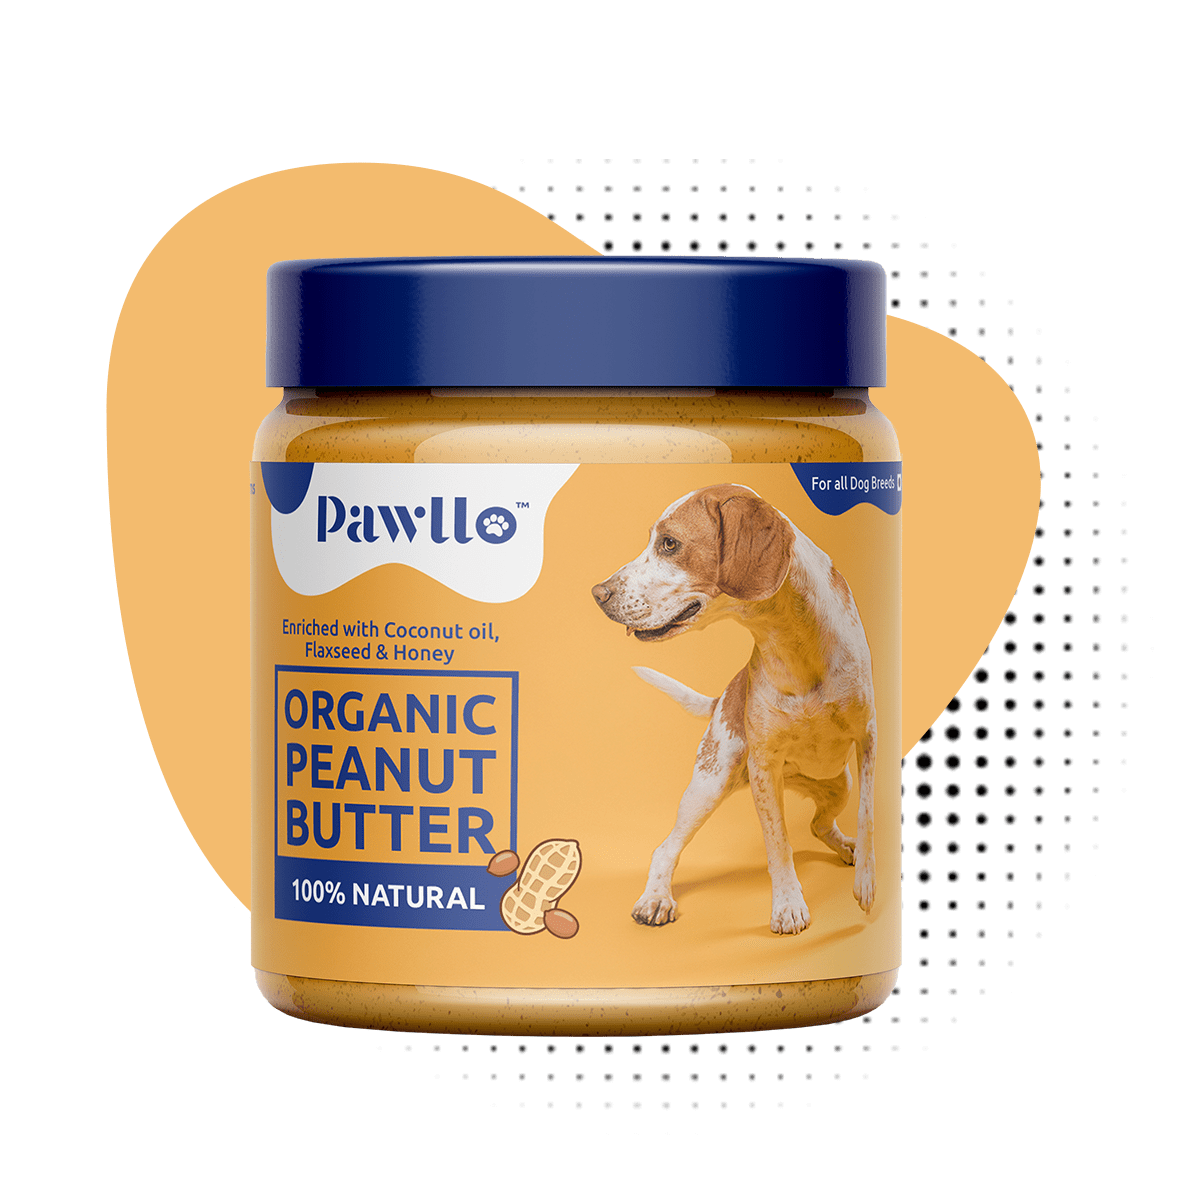 Peanut Butter Enriched with Coconut Oil, Flaxseeds & Honey for Dogs